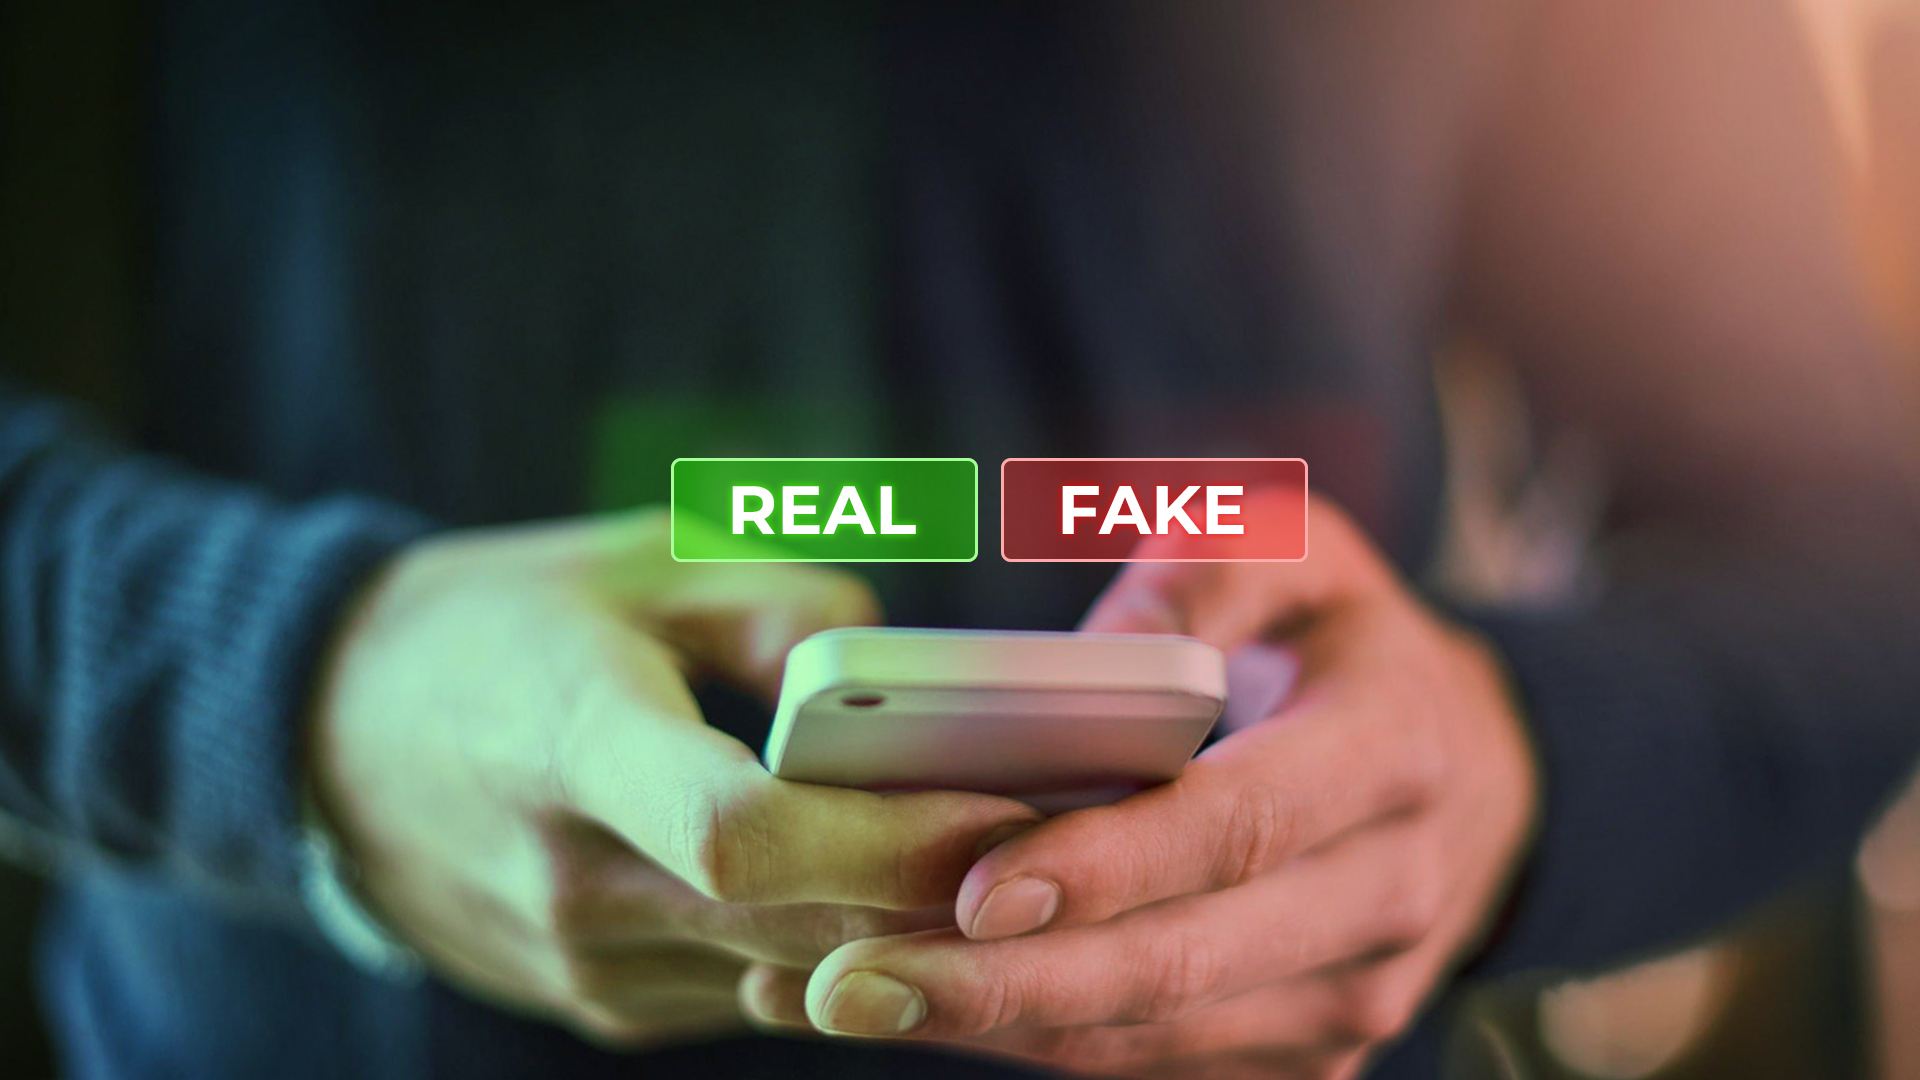 Majority of online adults in Singapore concerned about what is real and fake on the internet: Report